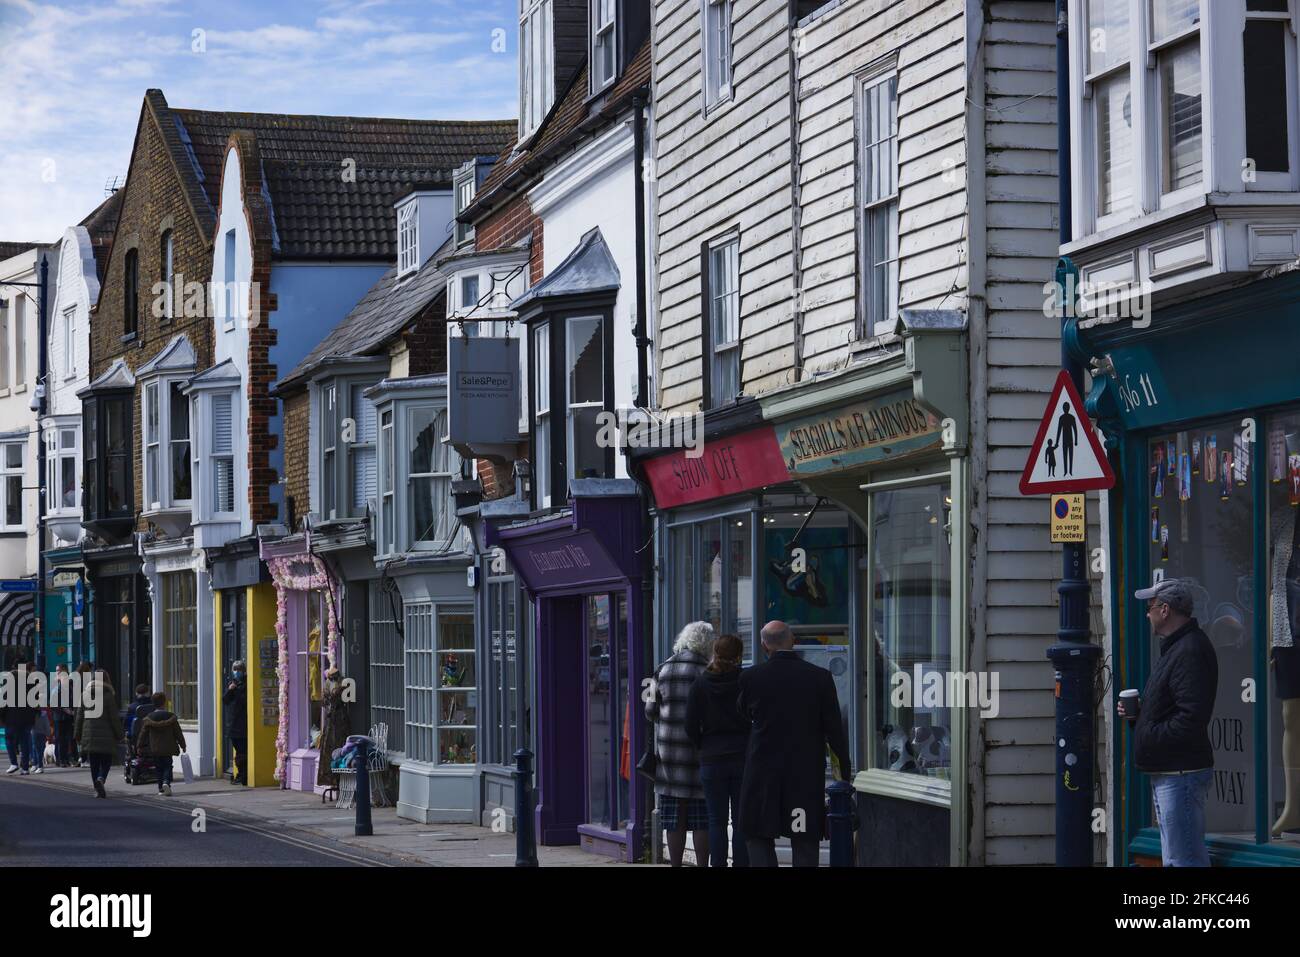 Shoppers browsing the independent shops in Harbour Street, Whitstable, UK on a bright sunny Sunday morning in April Stock Photo